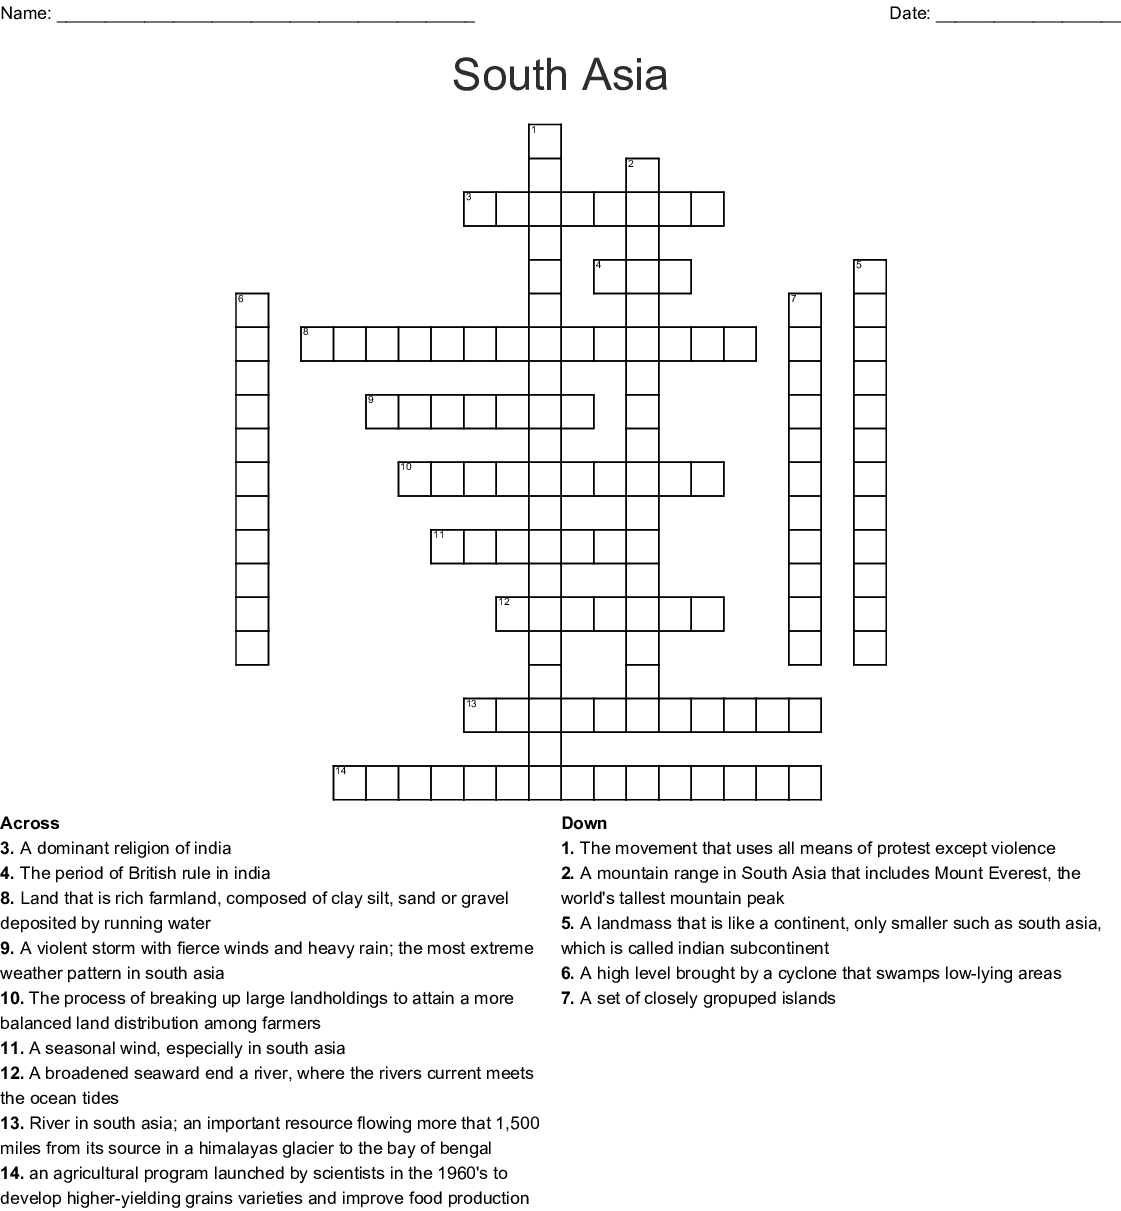 Geography Of Asia Crossword Puzzle Printable